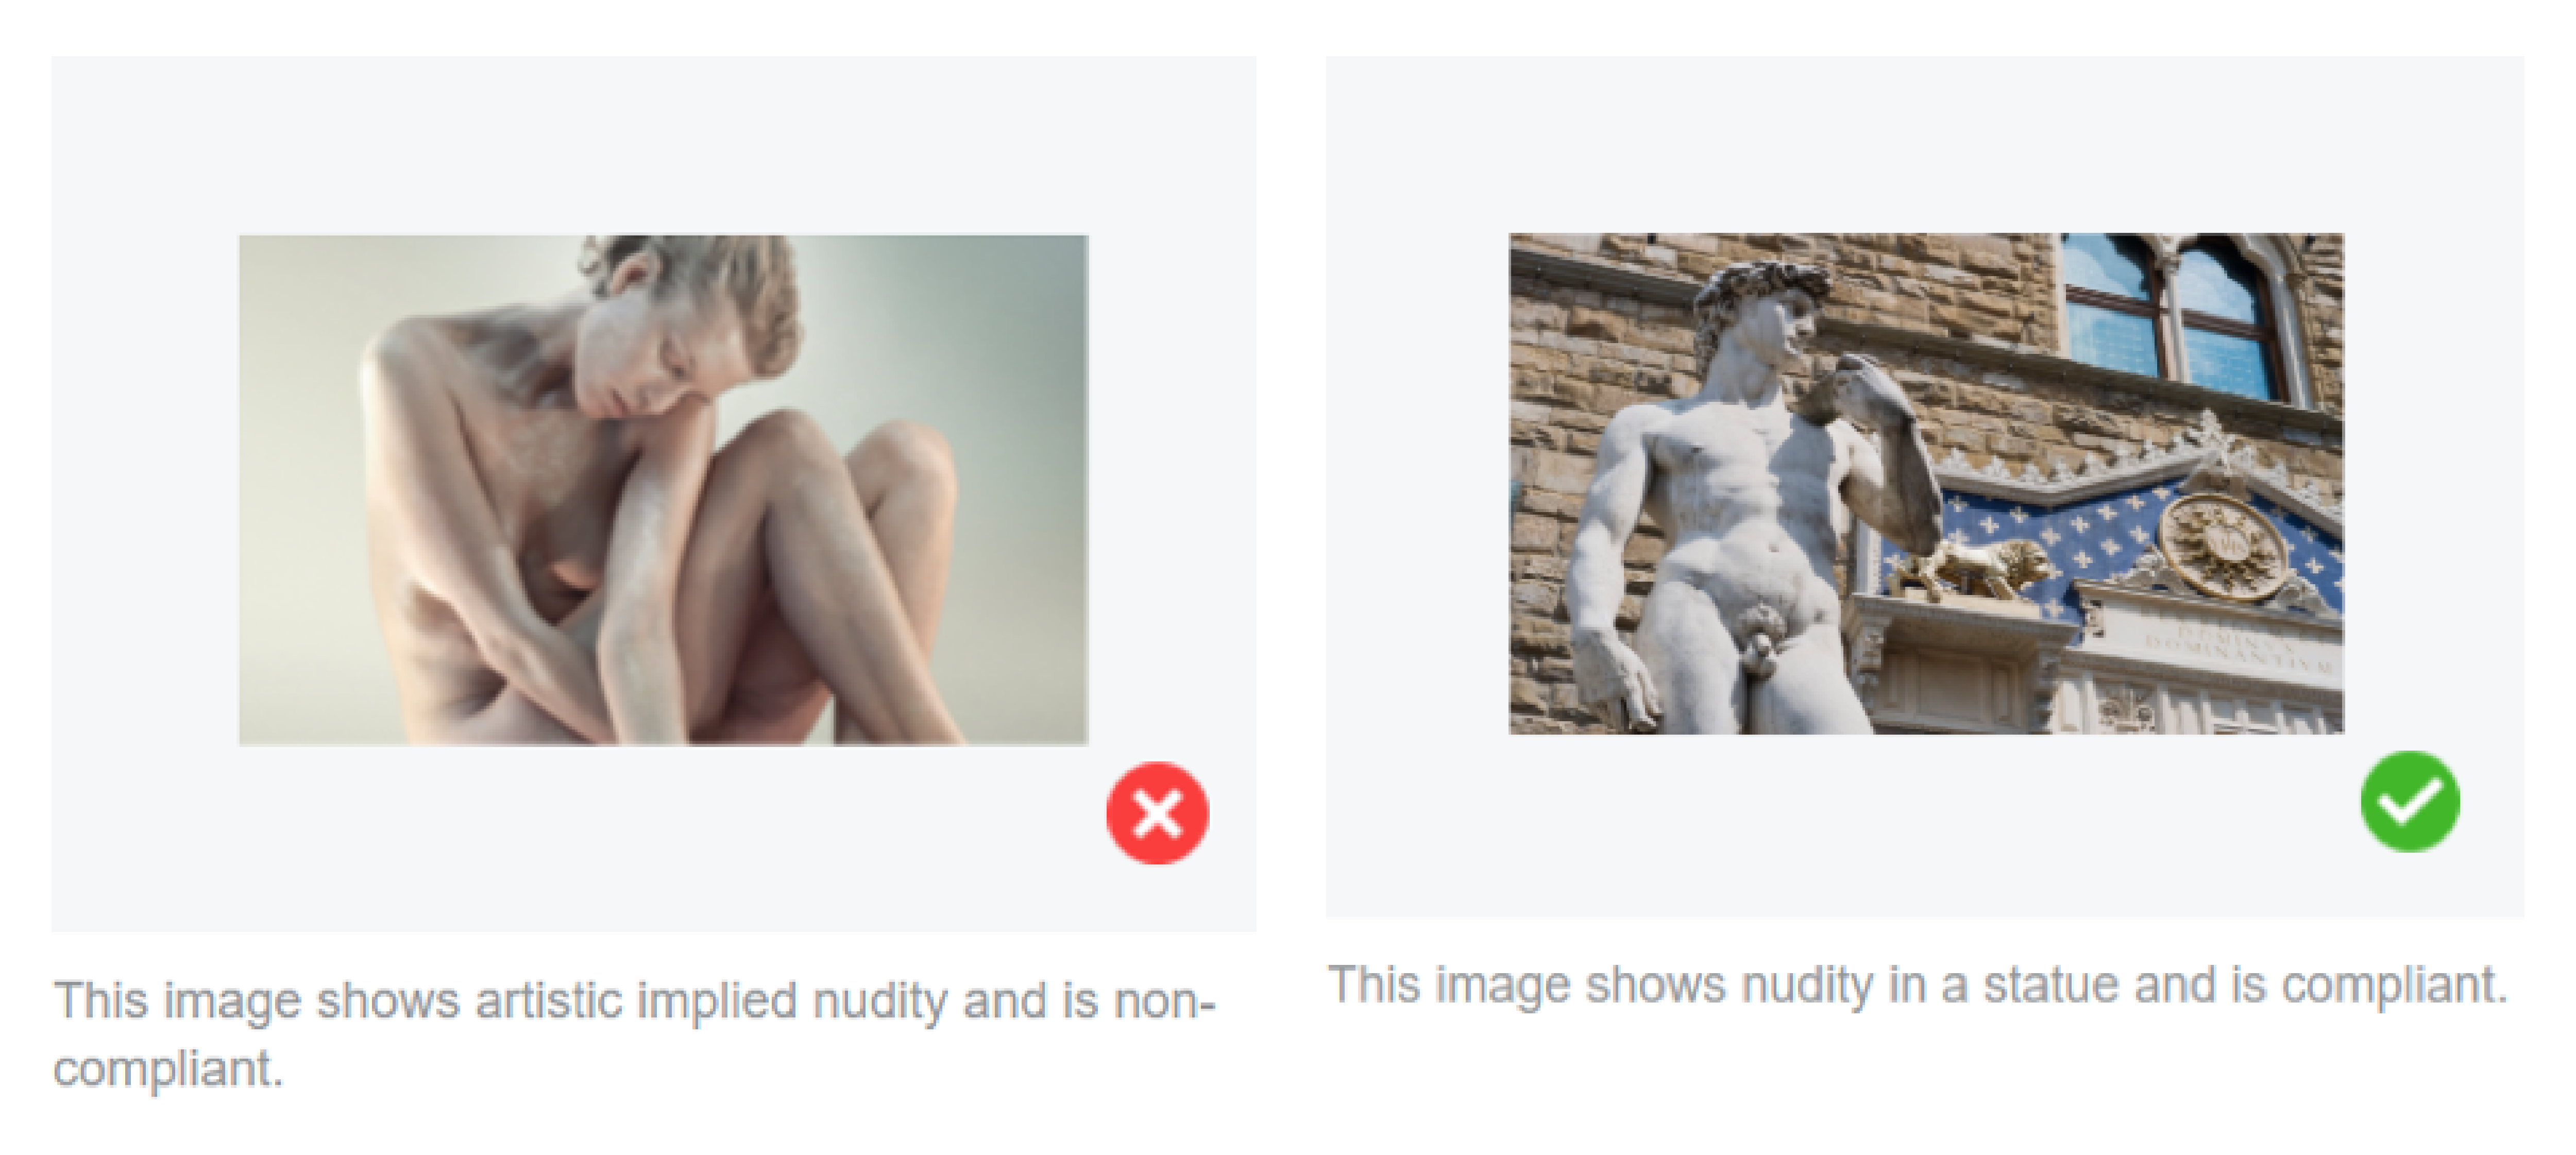 Commonly Disapproved Content: Nudity/Sexuality